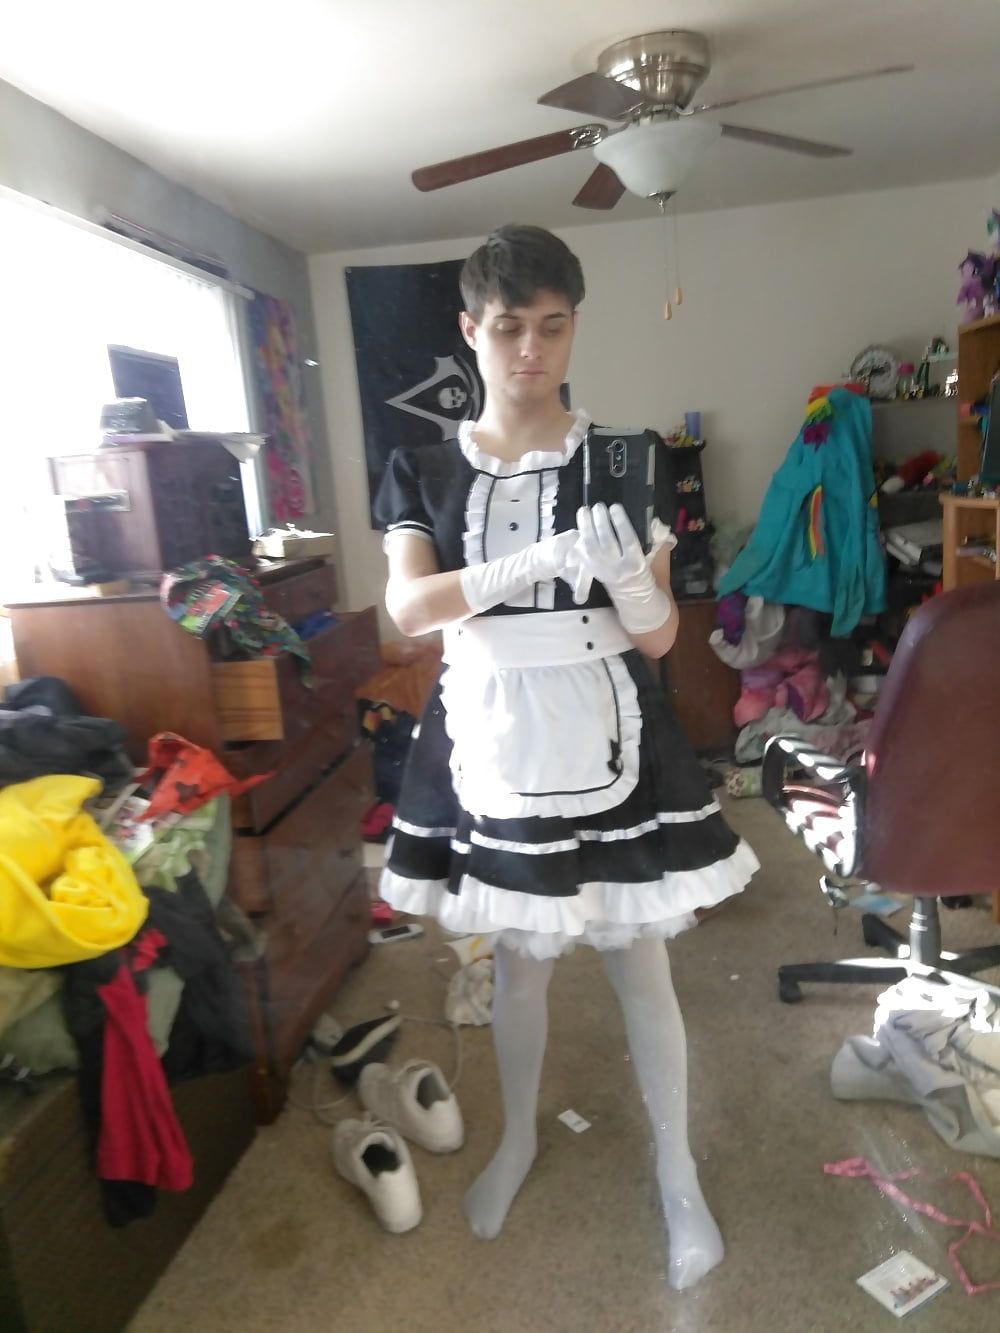 New maids outfit pics and updates